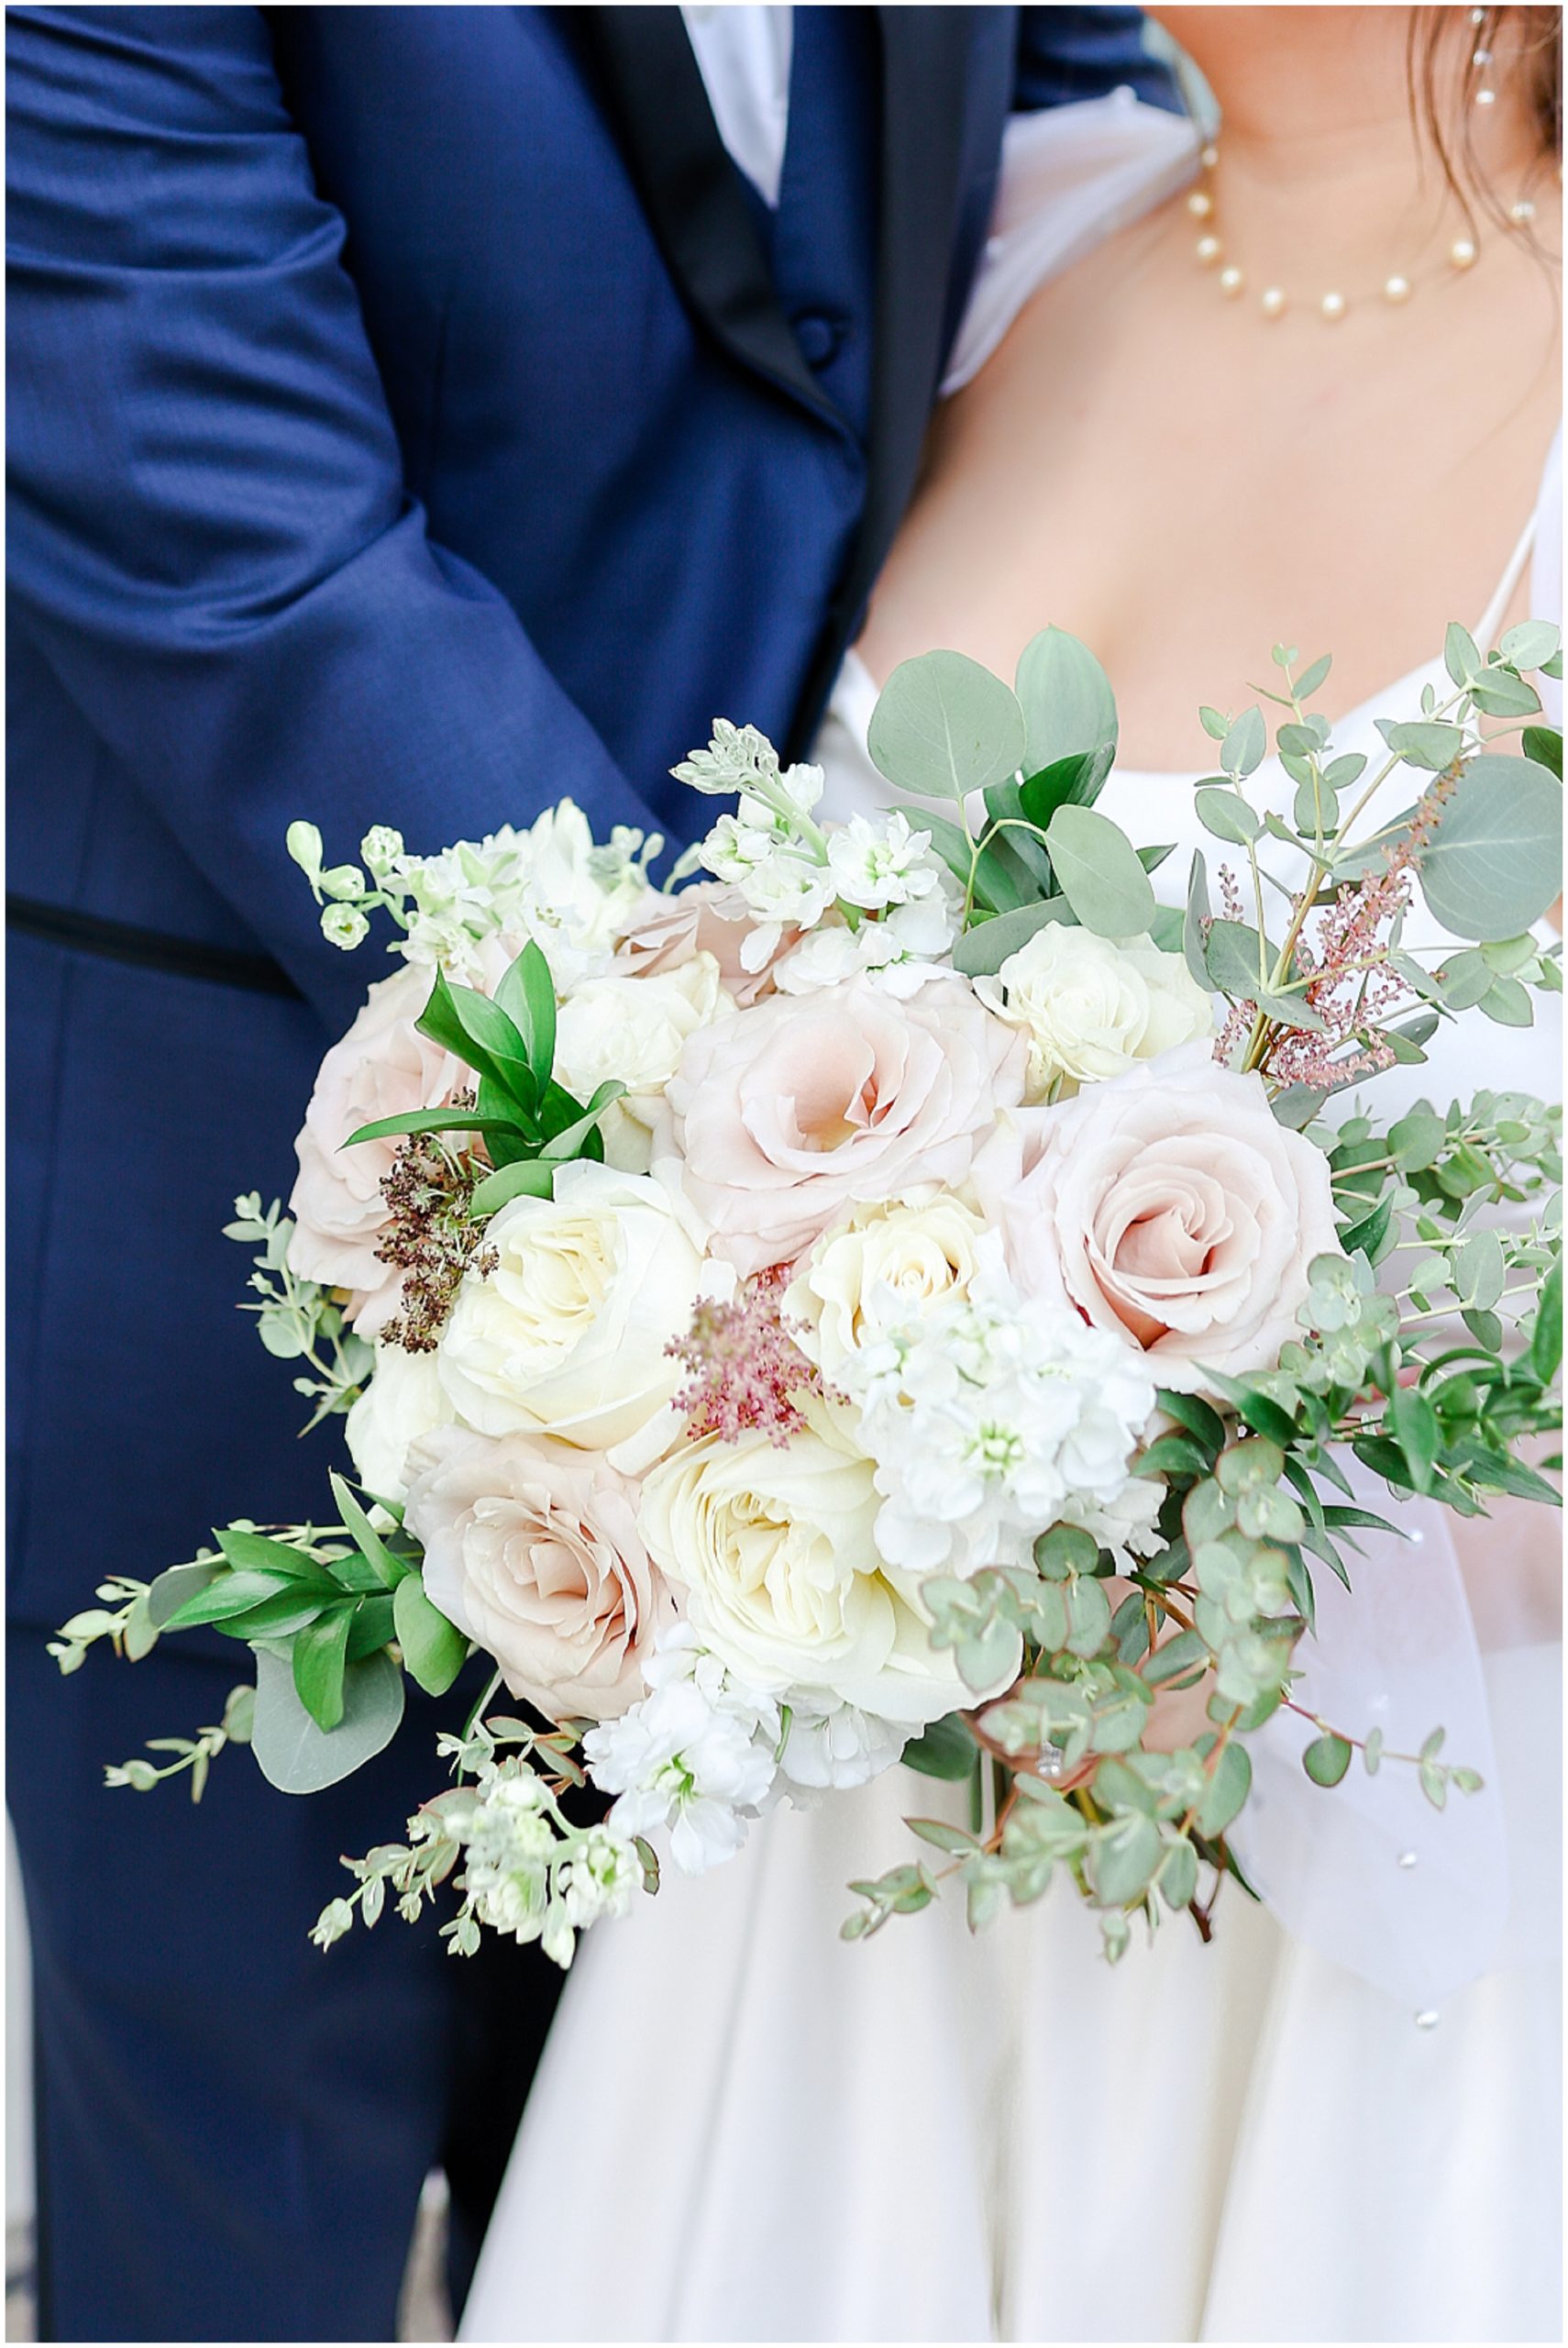 Wedding Planners and Florists - Wedding Photography